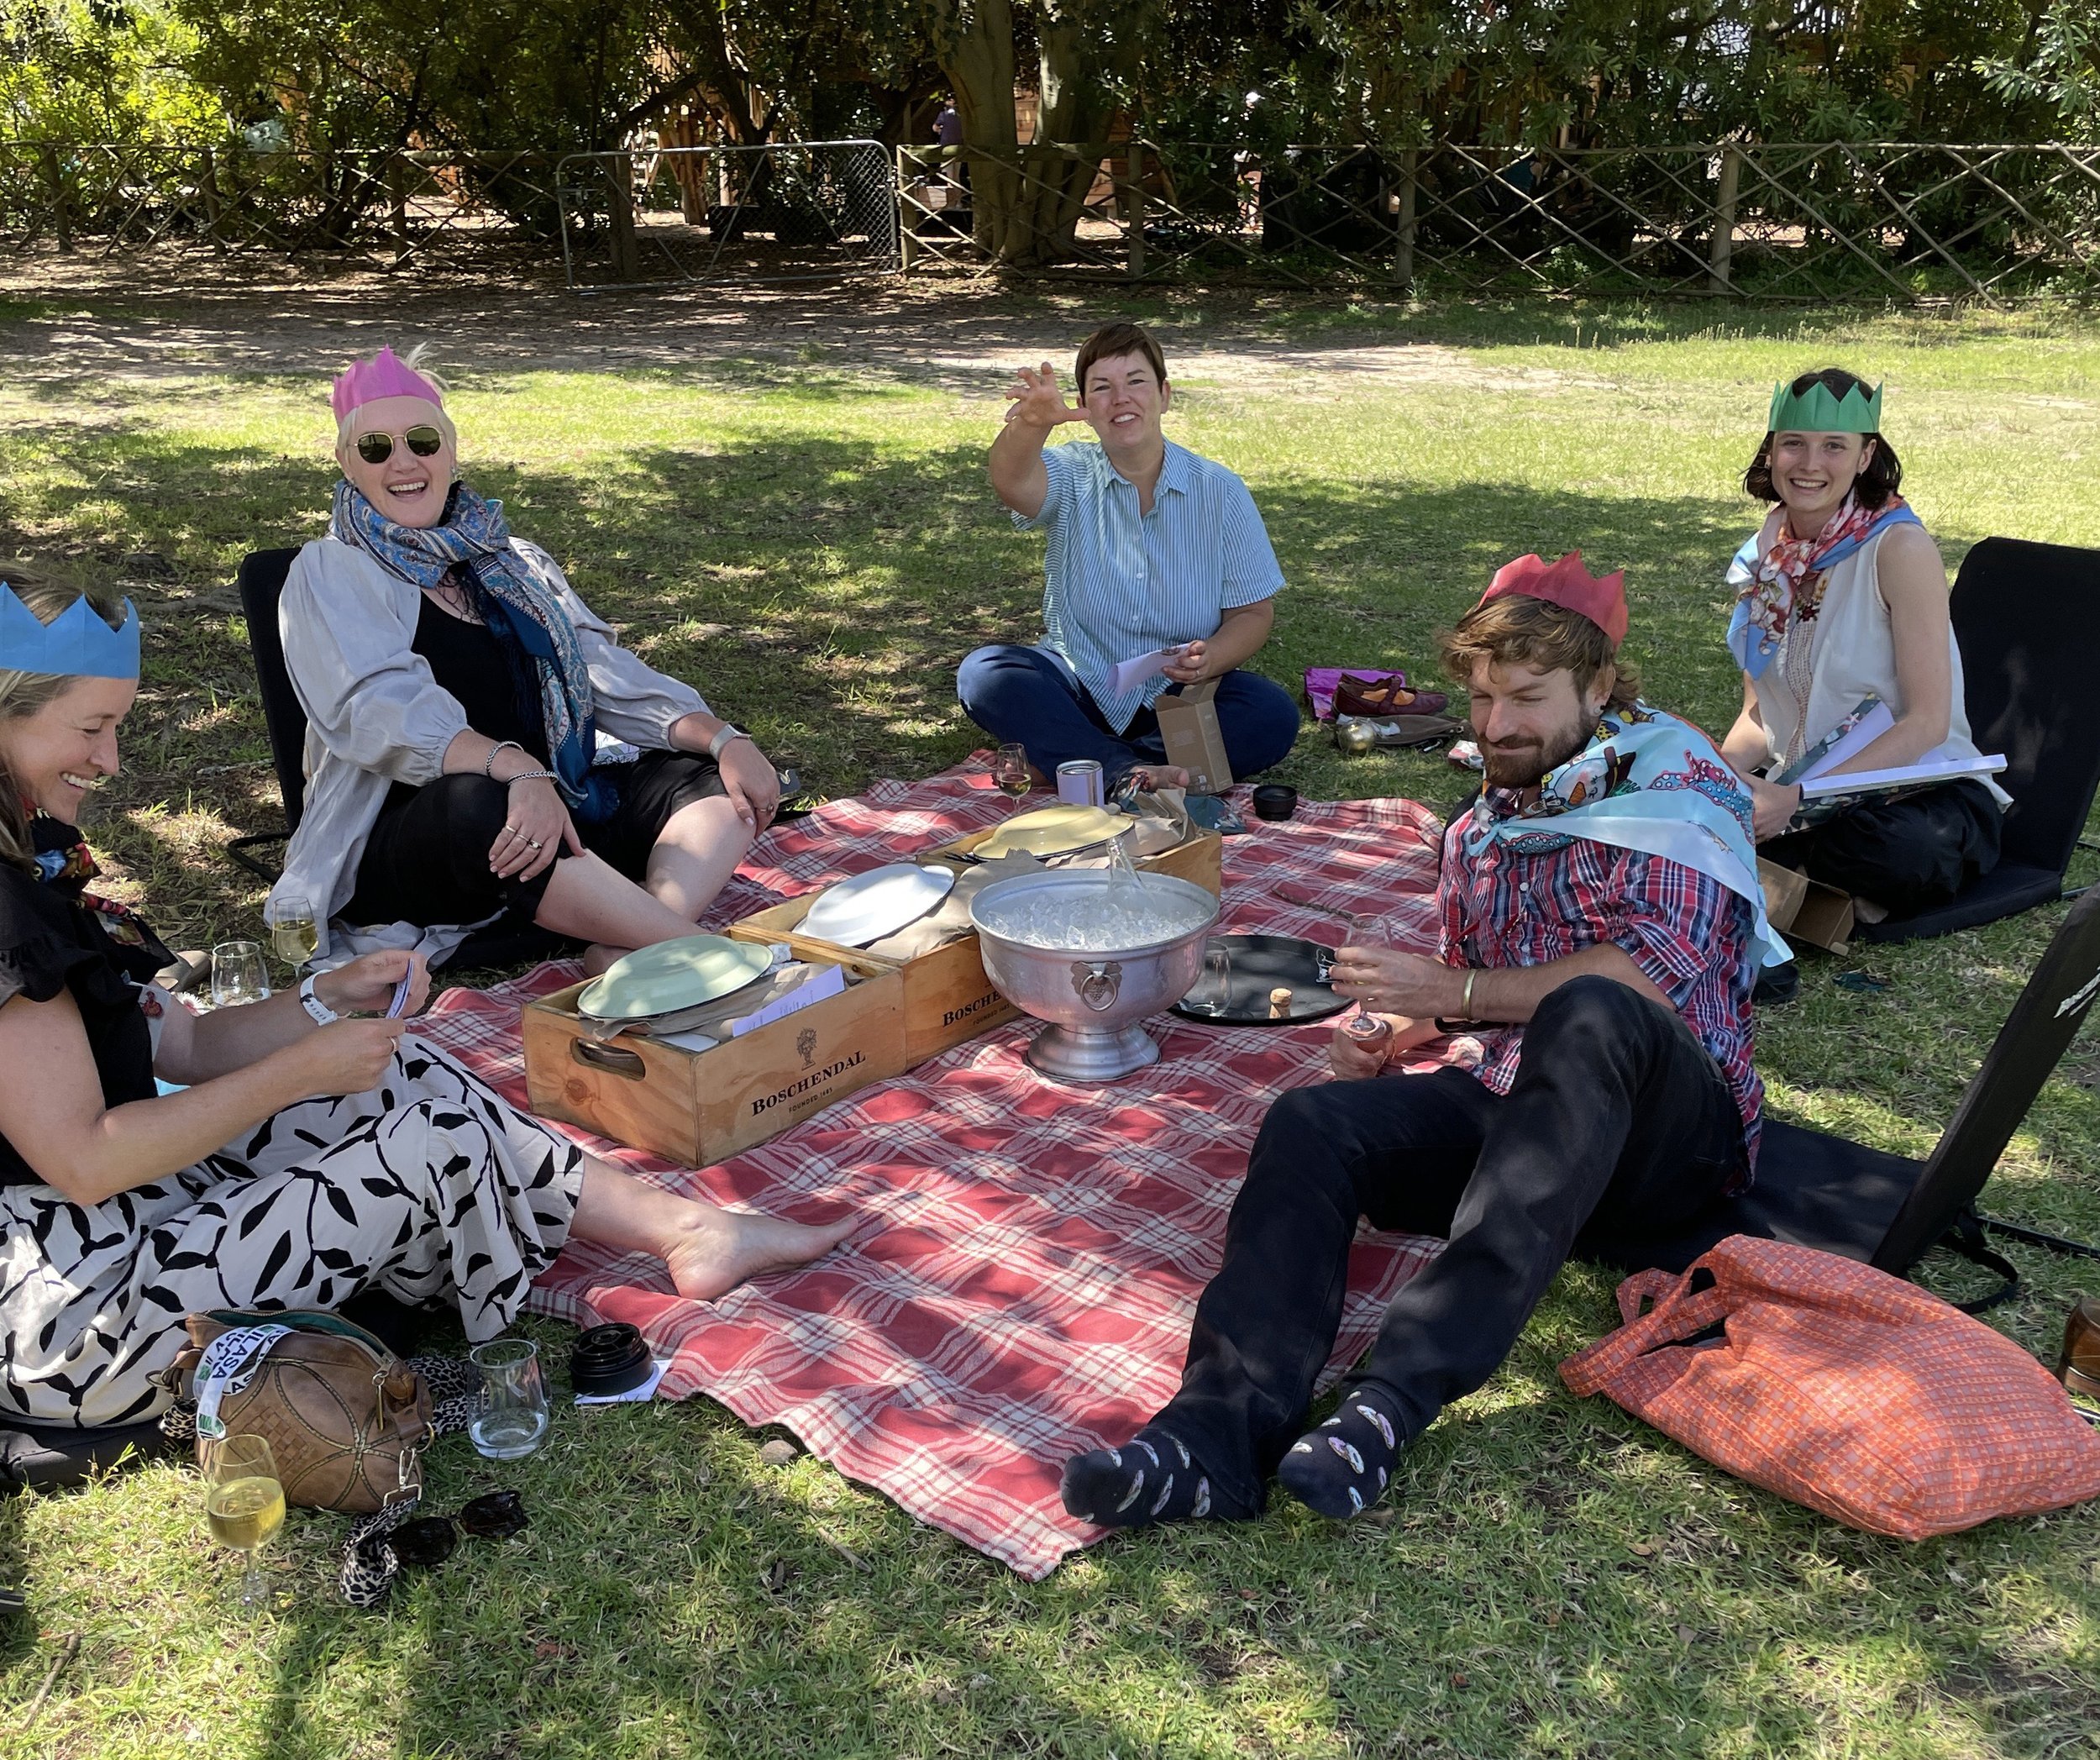  To conclude a busy and, in some ways, challenging year, the Terra+ team wrapped up the year with a relaxing Werf Farm Picnic at Boschendal. We spent the afternoon unwinding under the shade of trees in anticipation of a well-earned holiday. 